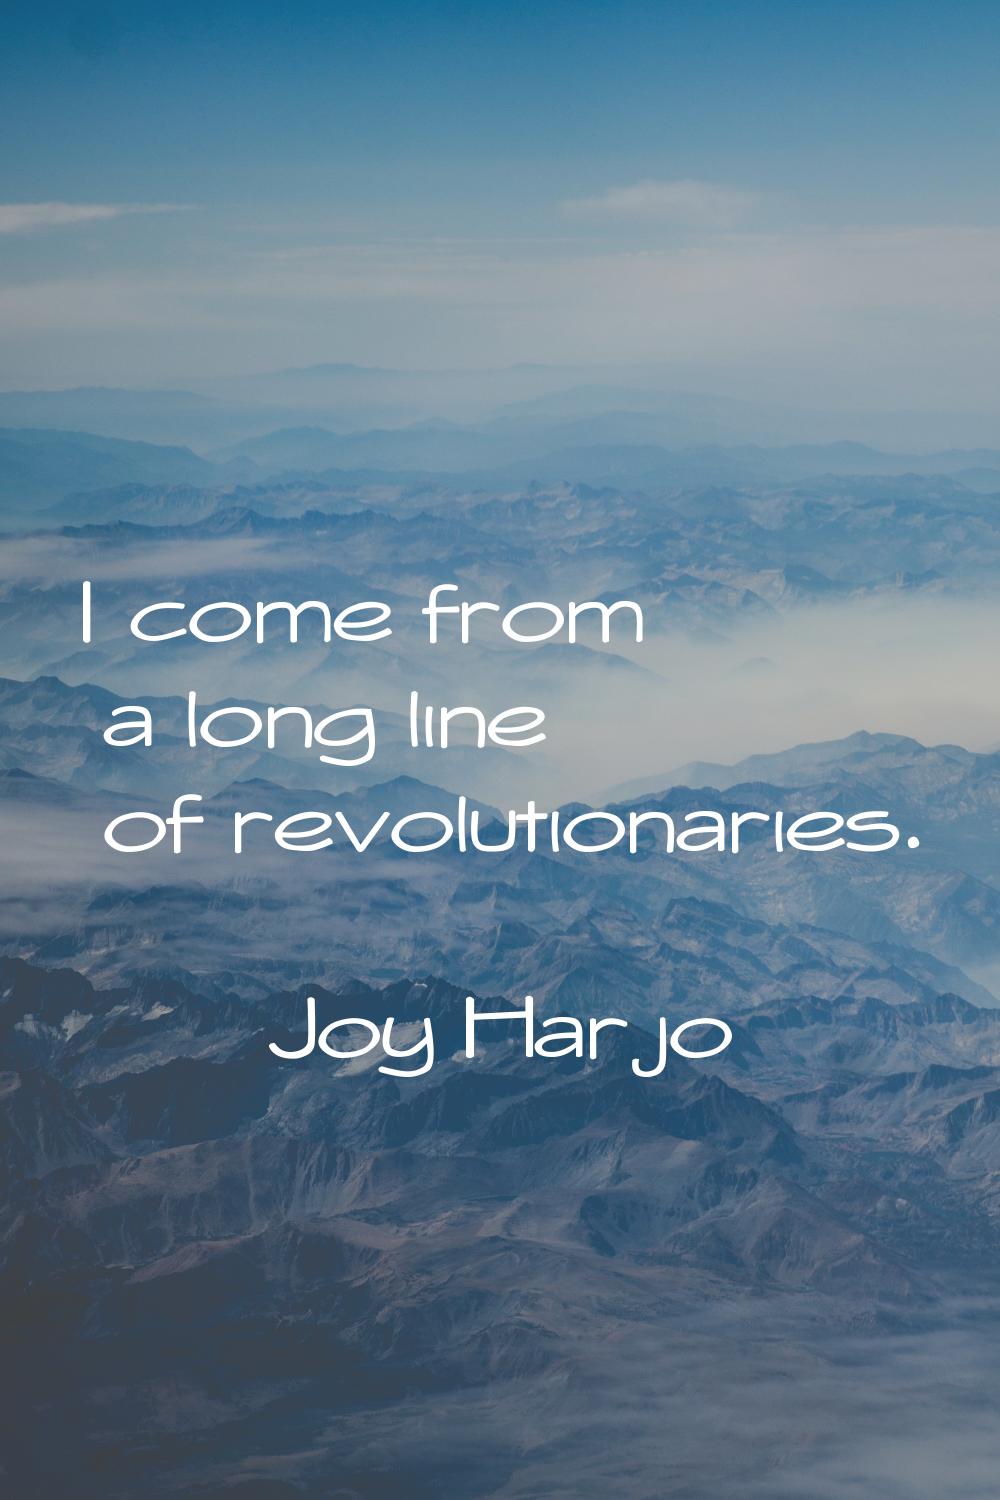 I come from a long line of revolutionaries.